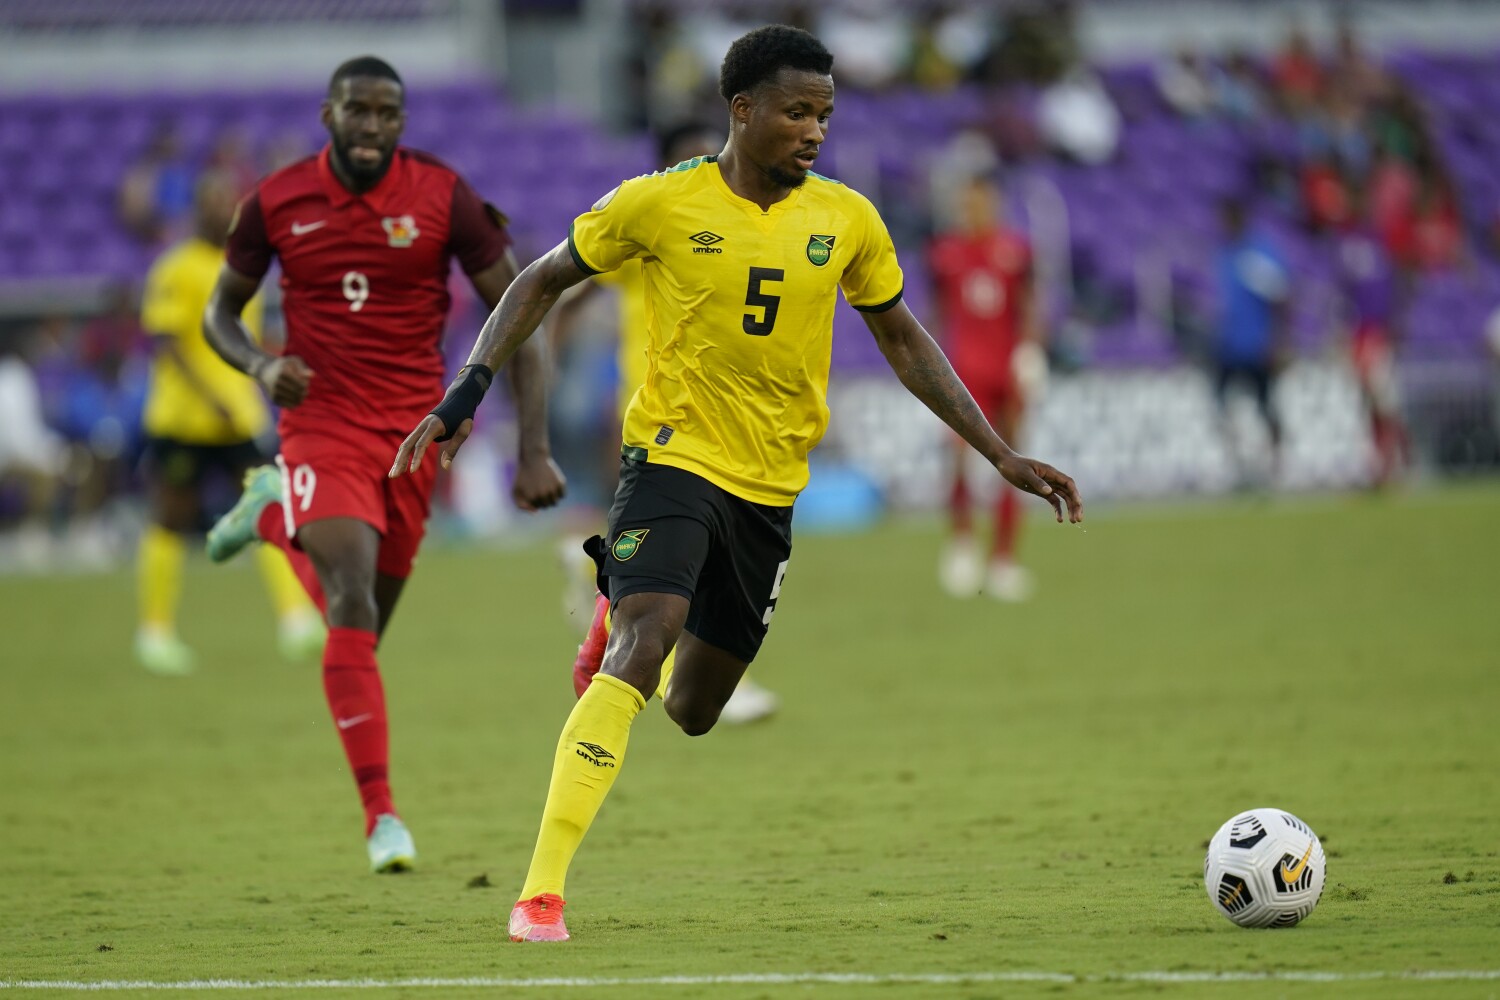 On eve of game against U.S., Jamaica national soccer team seeks fast track to success